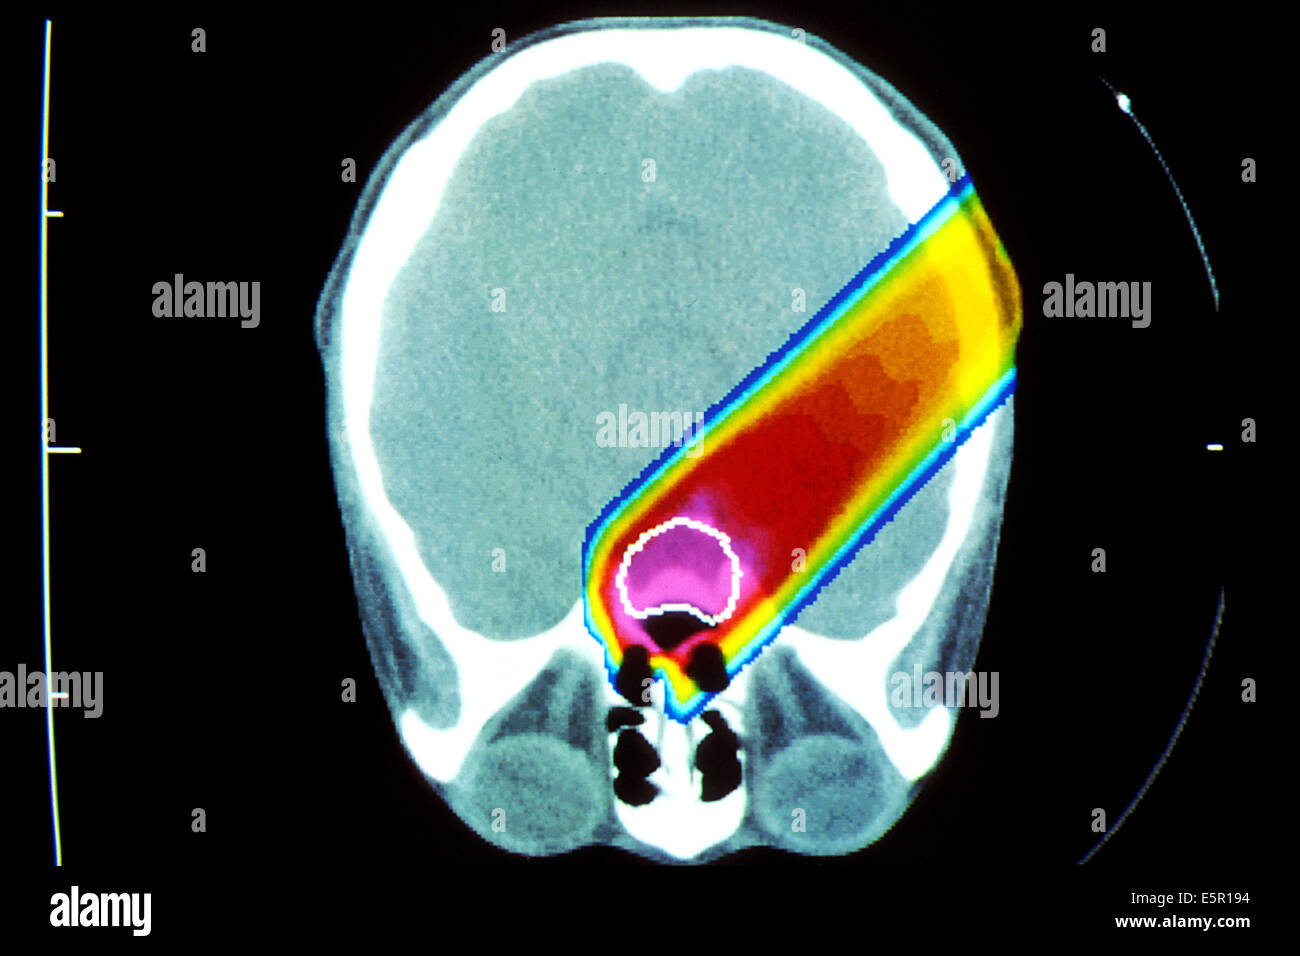 Image of a proton beam irradiating a brain tumor (circled in white). Stock Photo